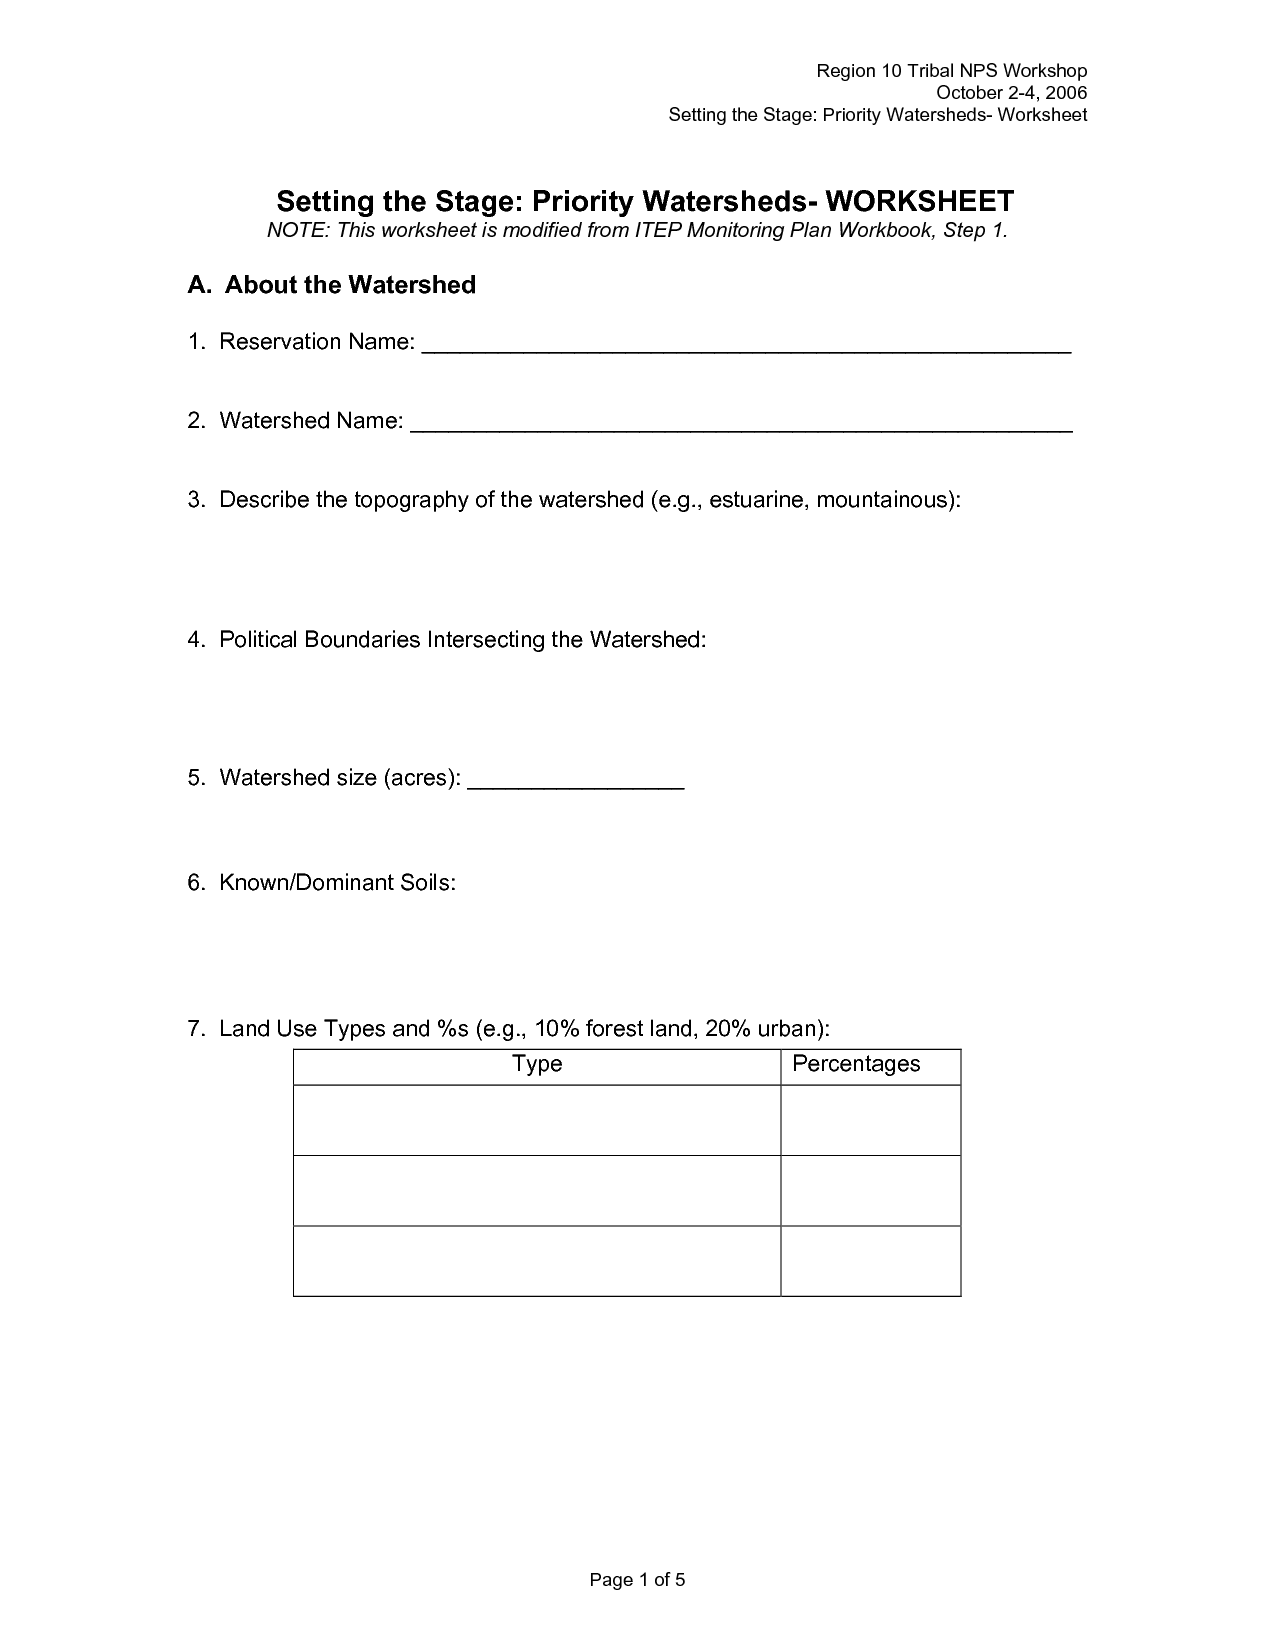 12 Best Images of Priority Planning Worksheet - Personal Financial